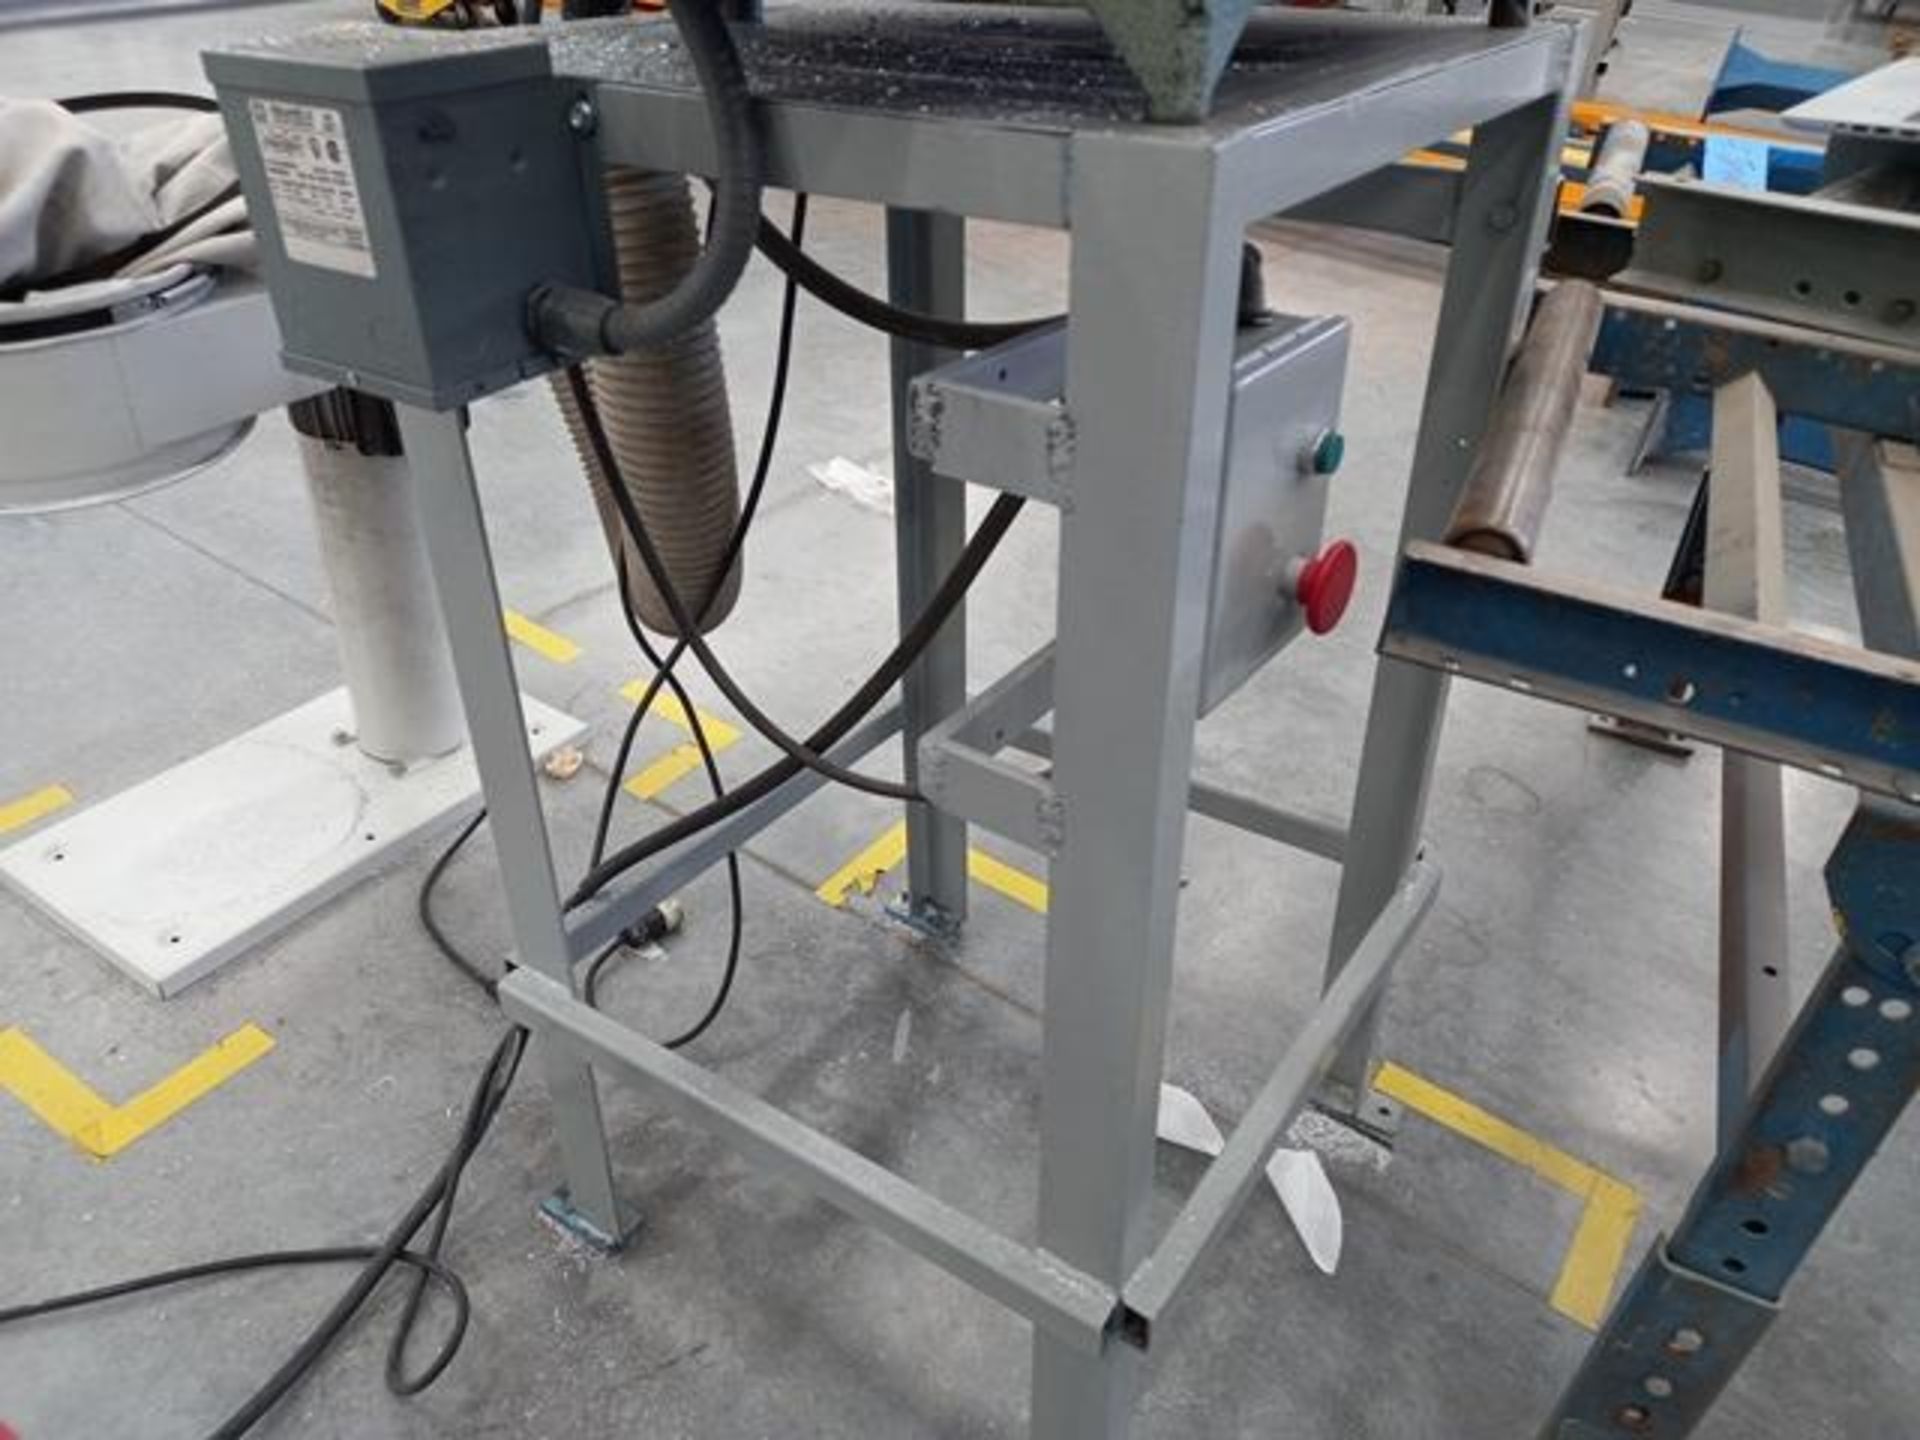 CTD Disc Cutter: 10" Disc, 2 HP Electric Motor, Includes Metal Workbench, 10" Disc, 2 HP Motor, - Image 11 of 12